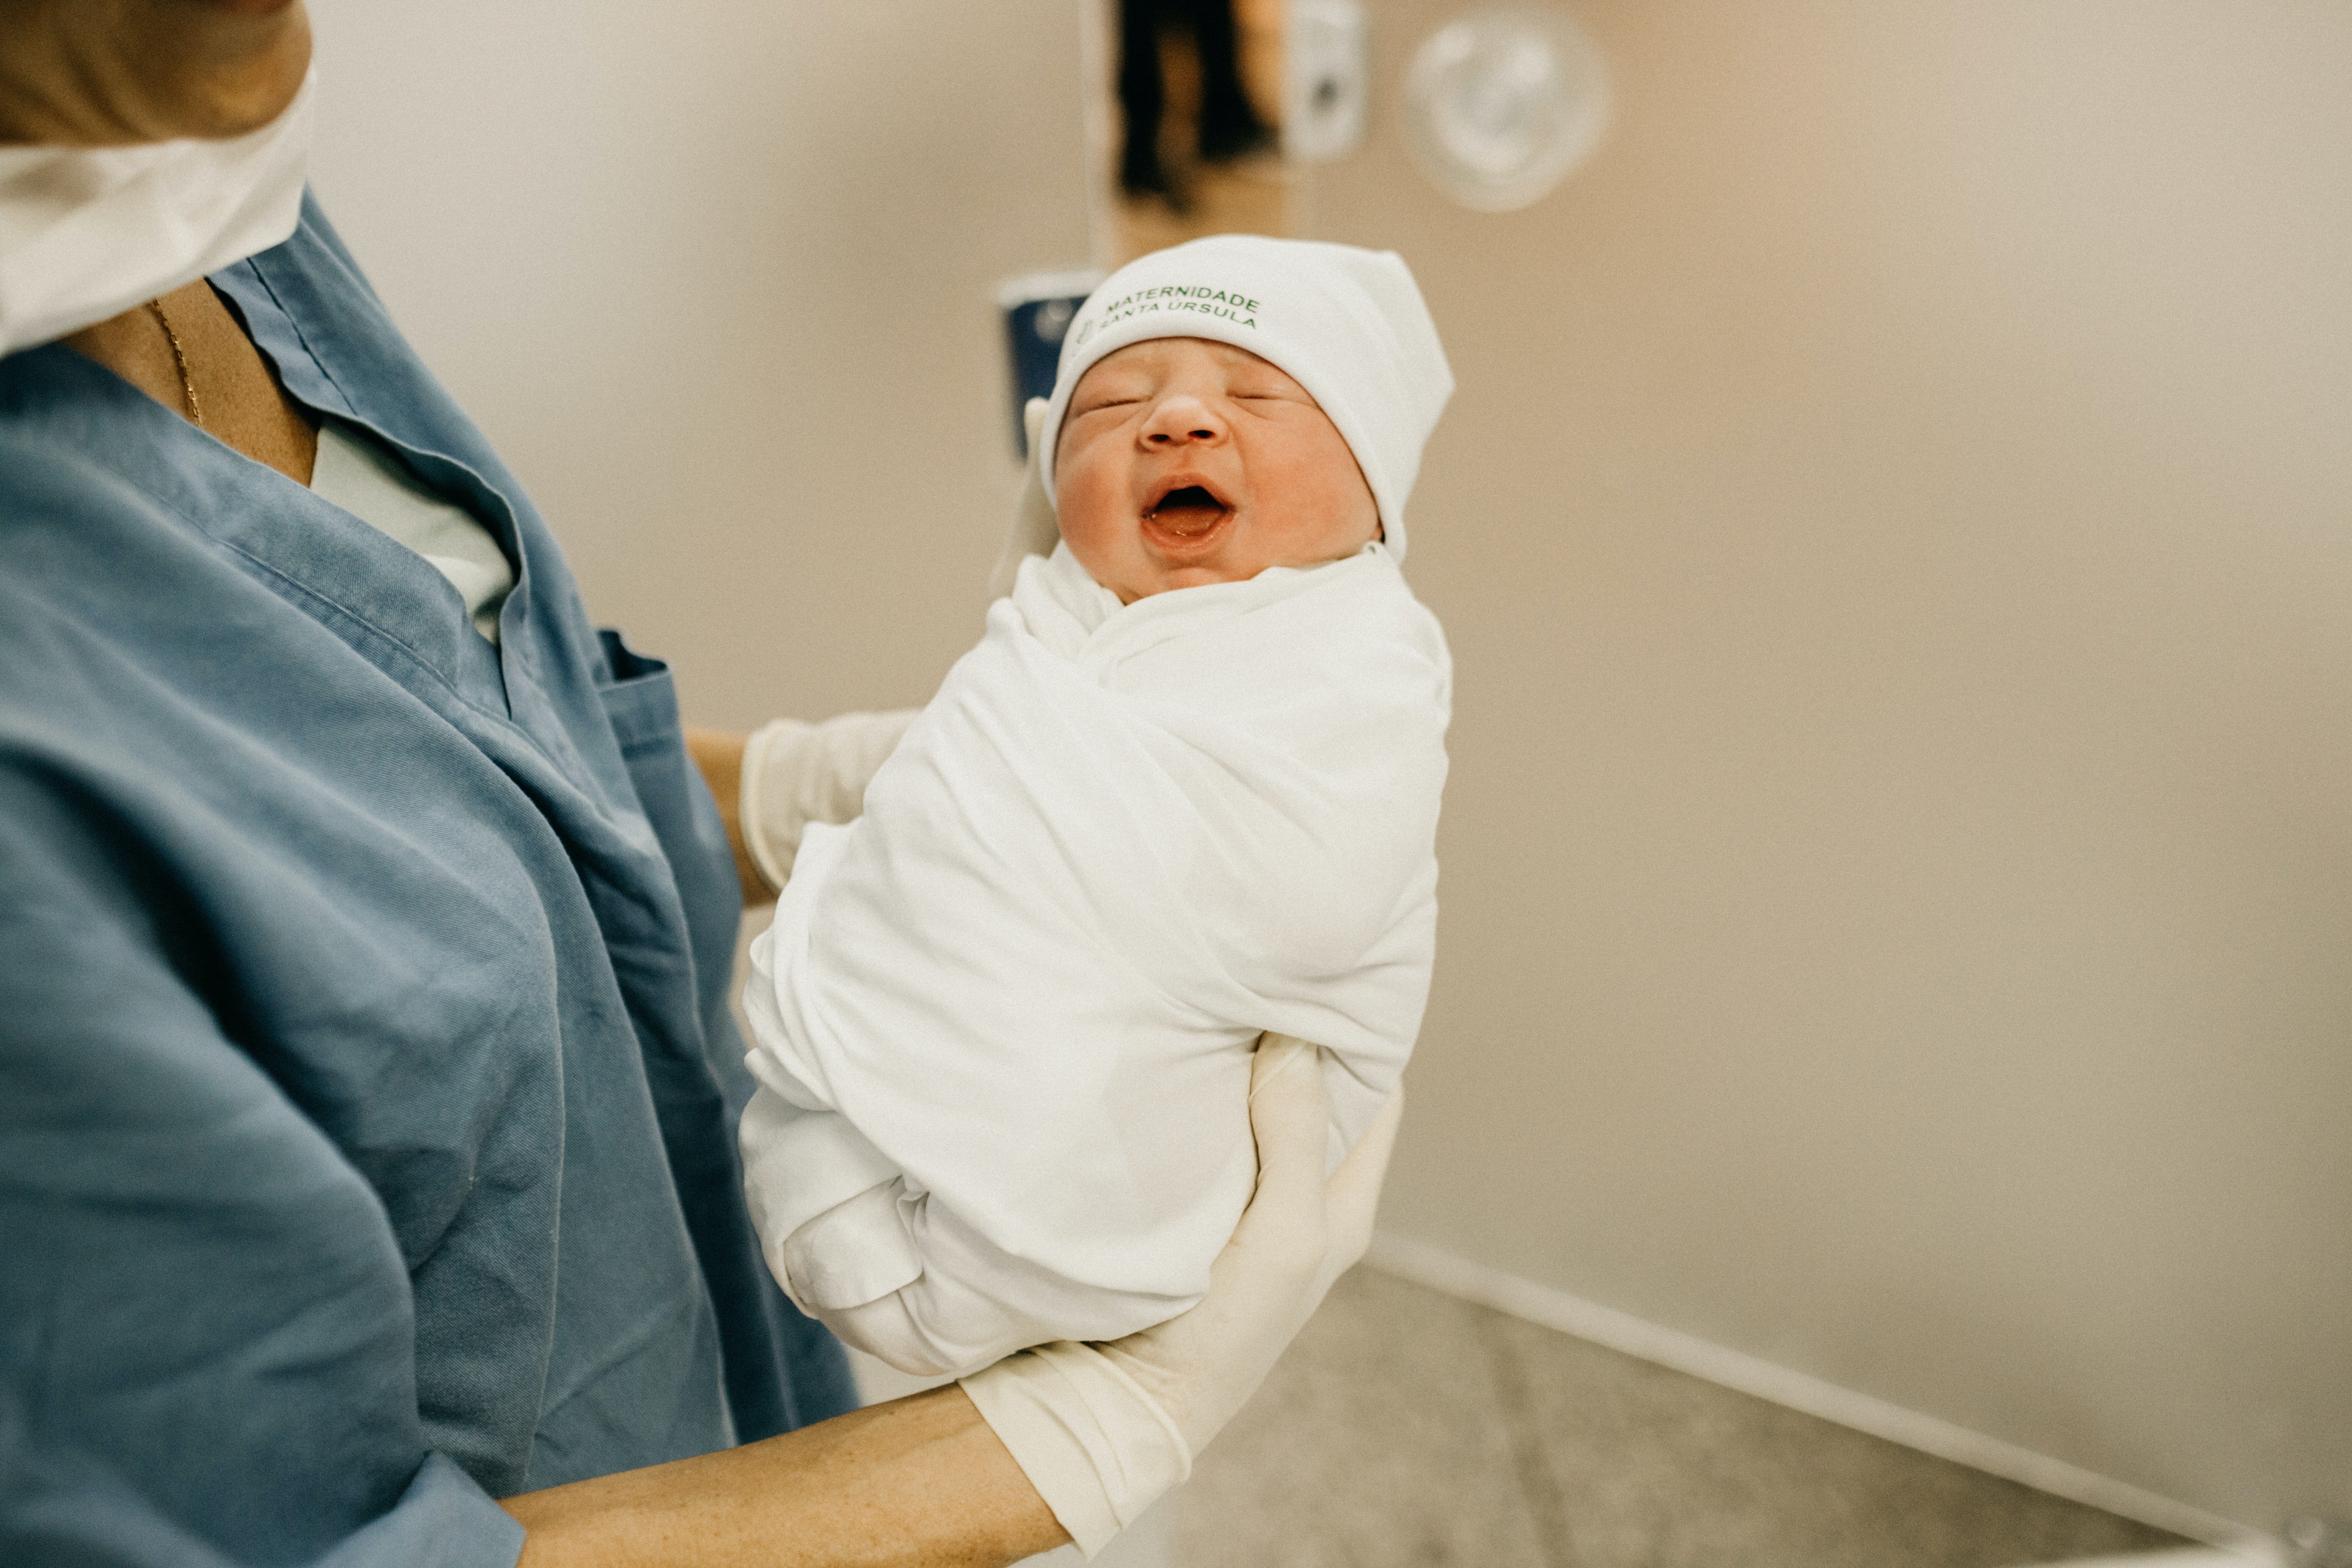 Nurse brings the baby boy Jimmy to me and my husband. | Source: Unsplash